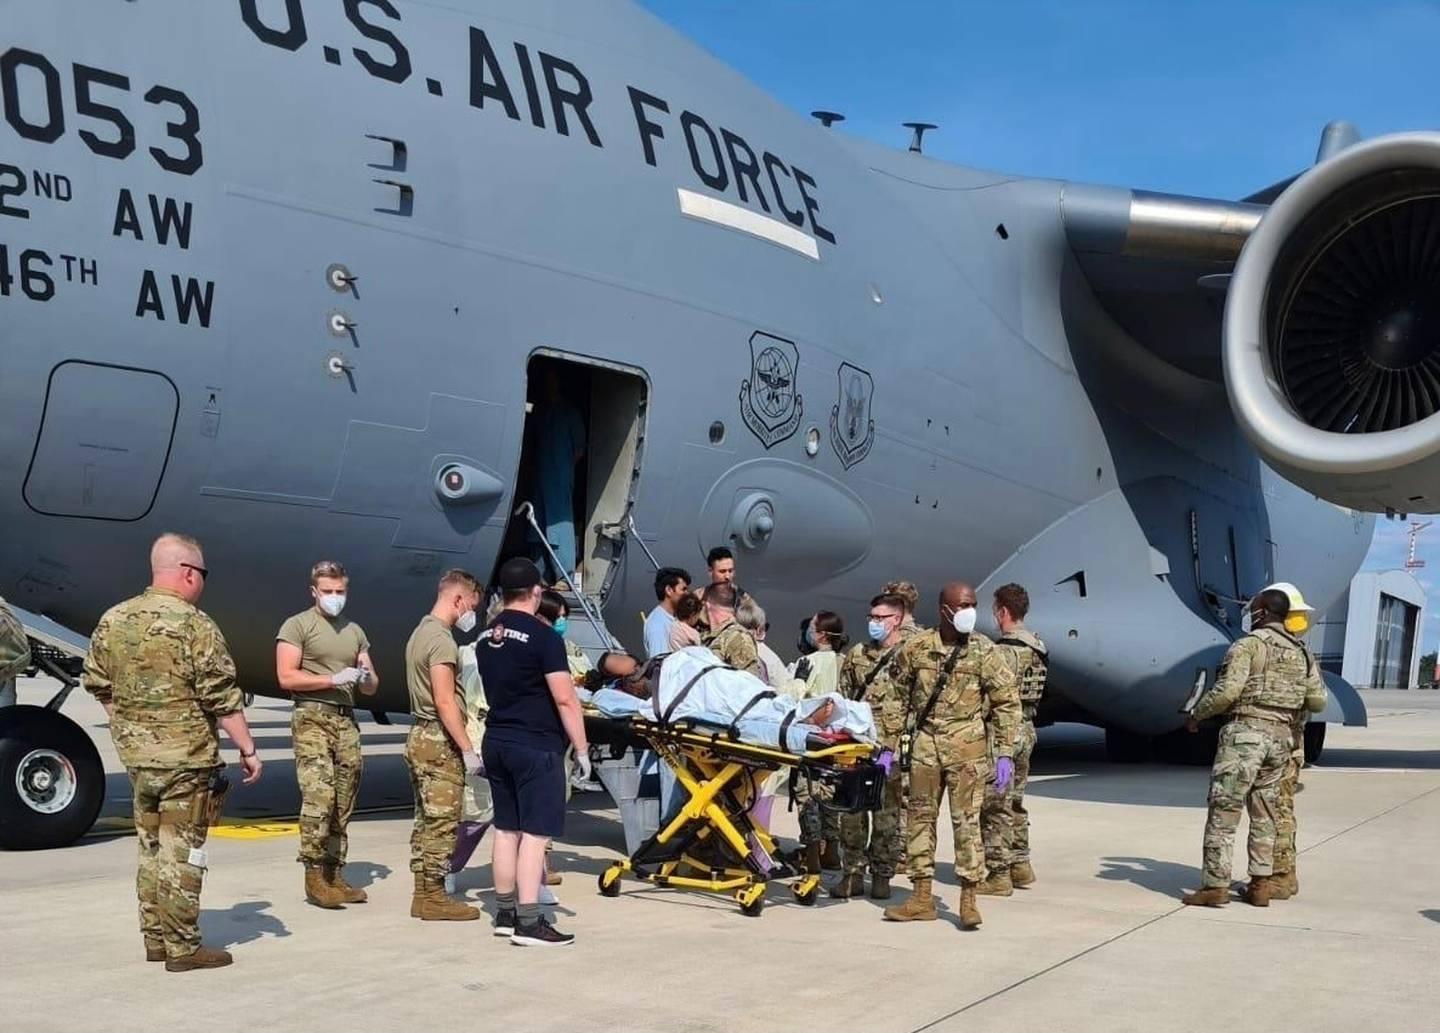 Medical support personnel from the 86th Medical Group and Landstuhl Regional Medical Center help an Afghan mother and family off a U.S. Air Force C-17, call sign Reach 828, moments after she delivered a child aboard the ai Afghan baby born on C-17 bound for Germany named ‘Reach,’ after the jet’s call sign